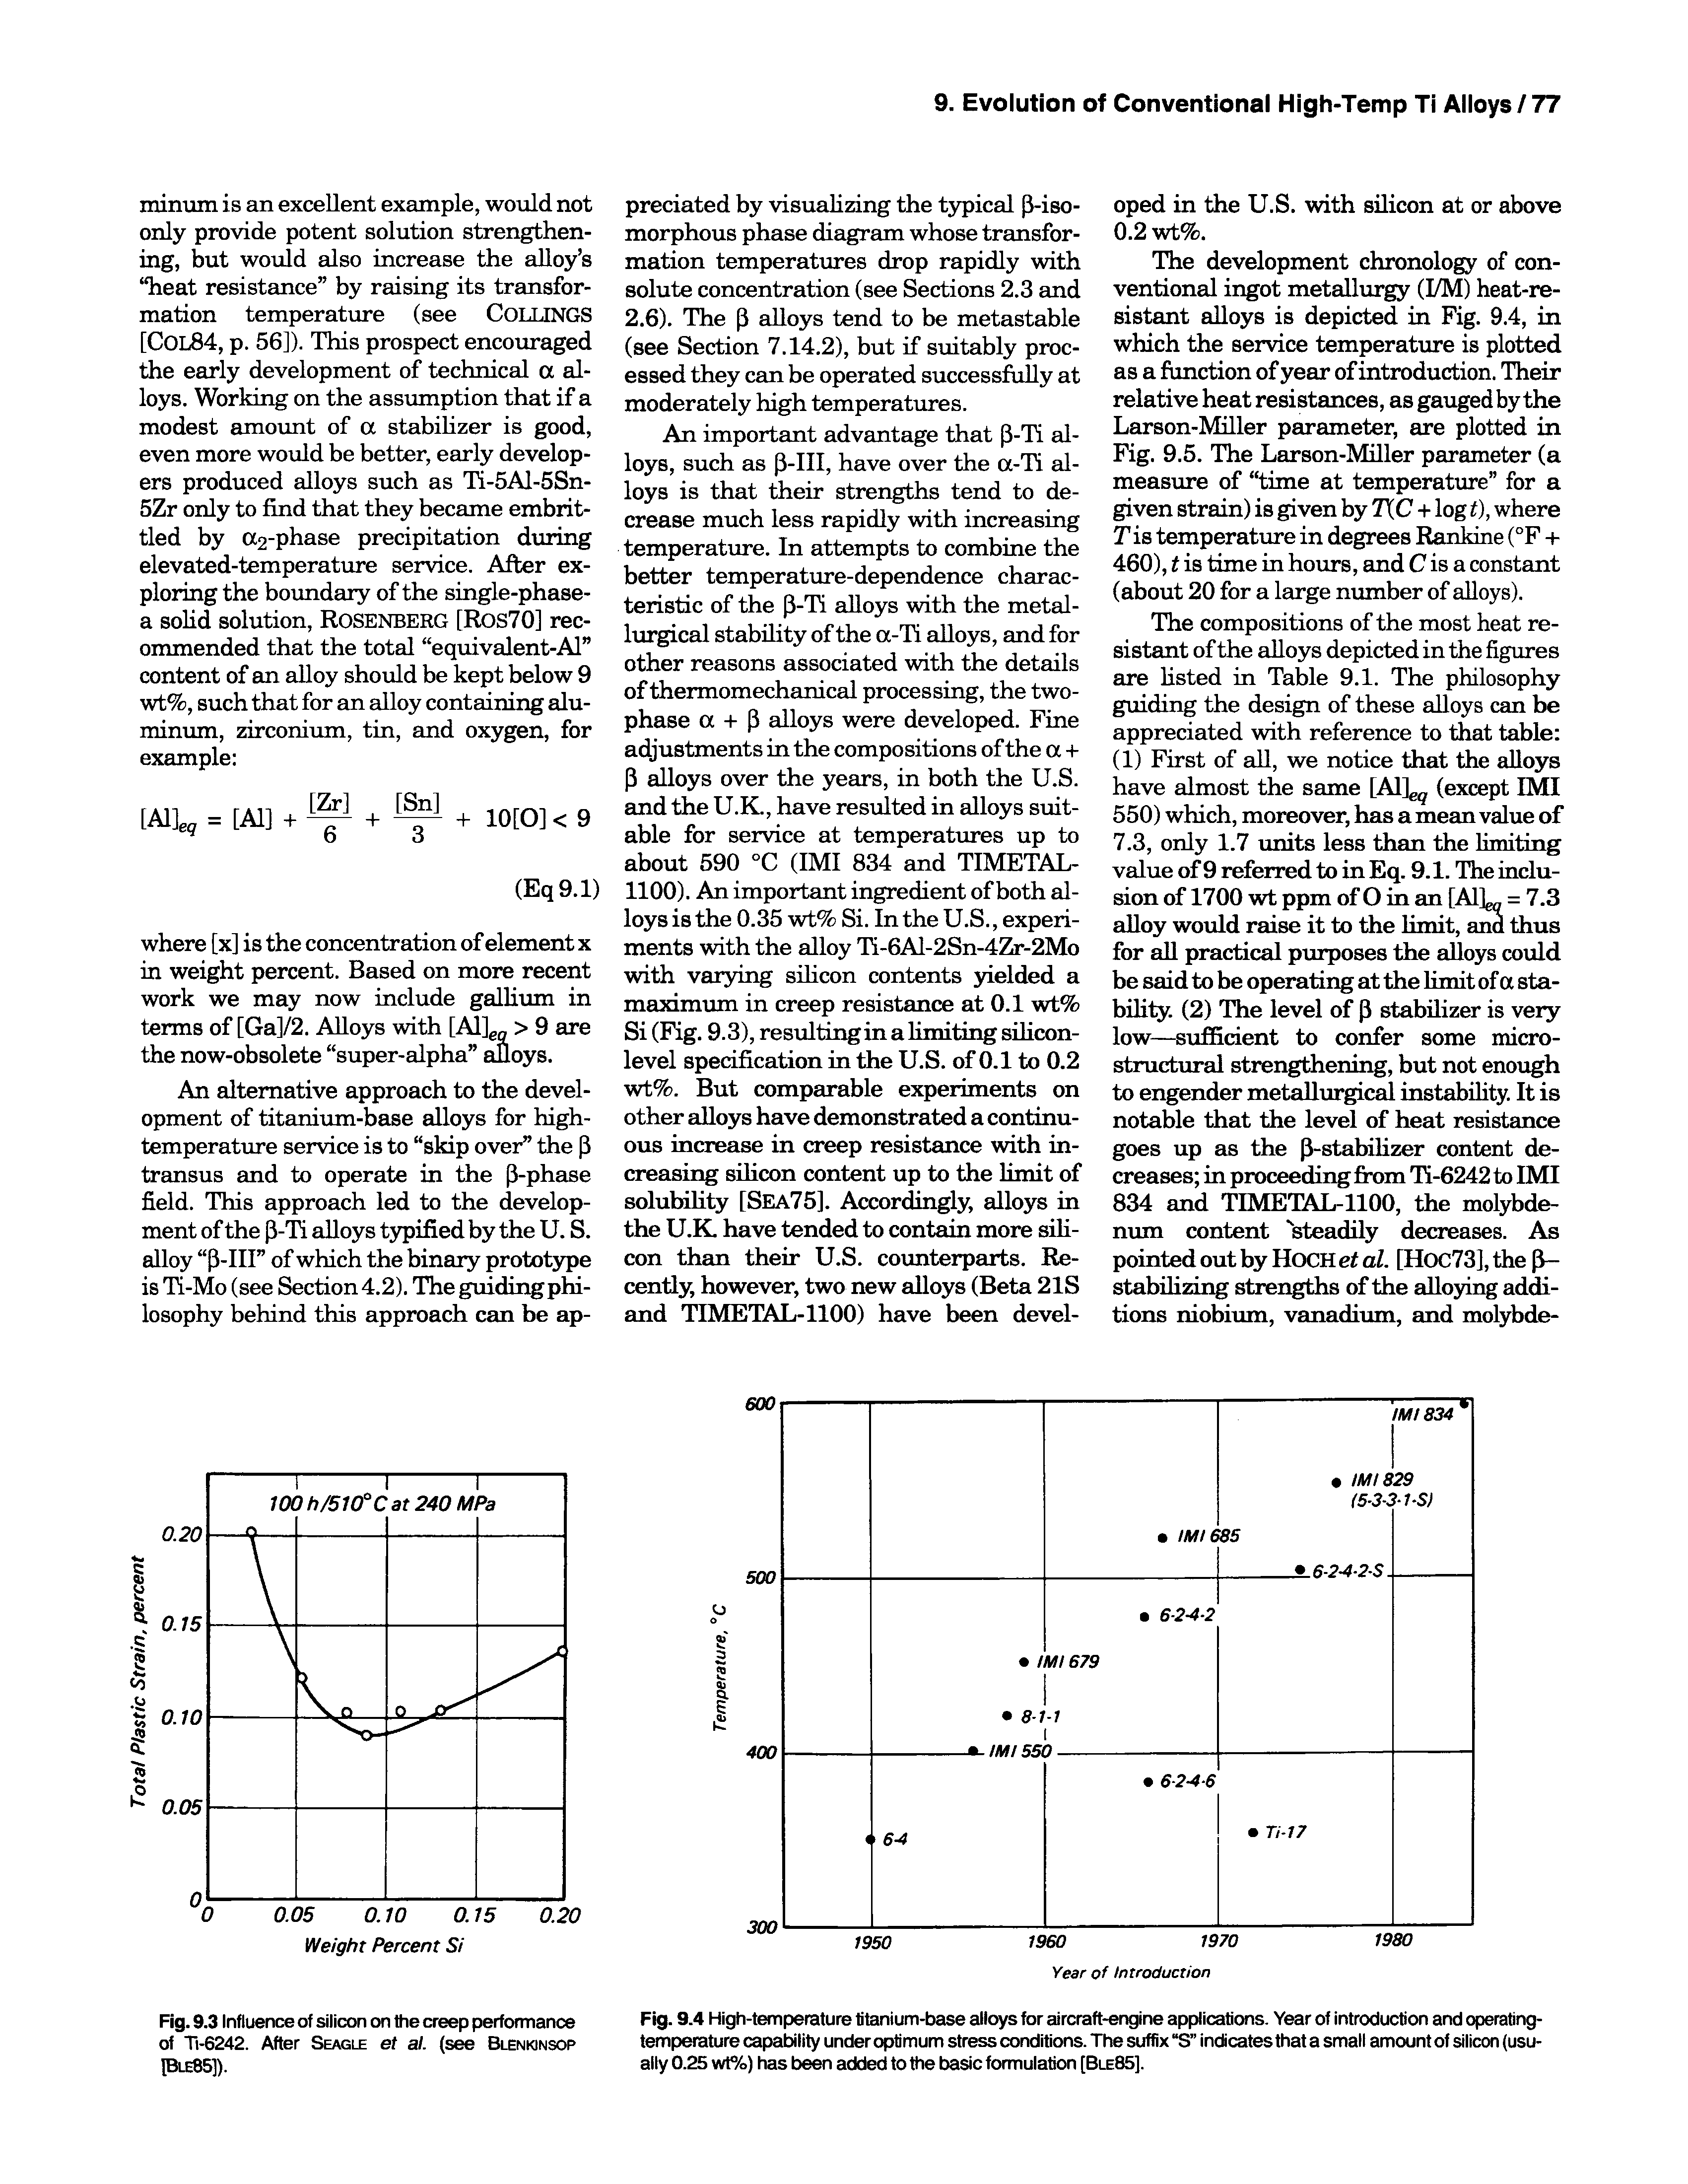 Fig. 9.4 High-temperature titanium-tsase alloys for aircraft-engine applications. Year of introduction and operating-temperature capability under optimum stress conditions. The suffix S indicates that a small amount of silicon (usually 0.25 wt%) has been added to the basic formulation [Ble85].